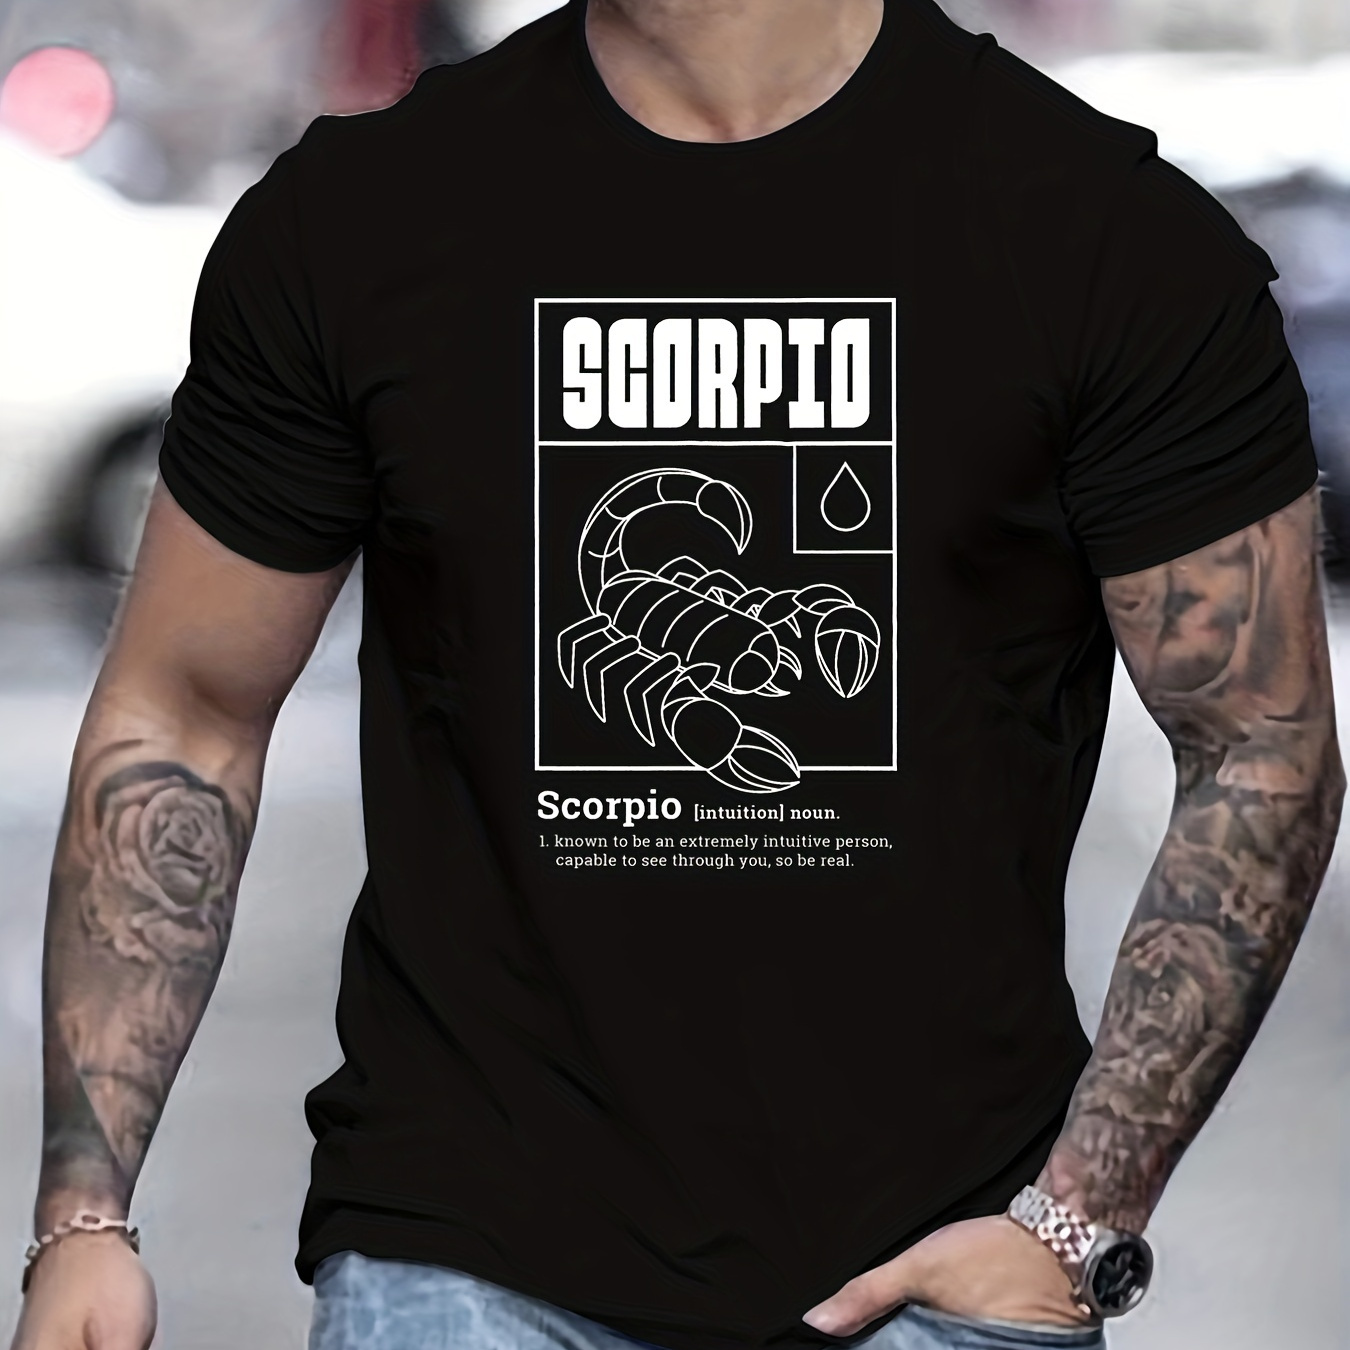 

Scorpio Pattern Print Men's Comfy Chic T-shirt, Graphic Tee Men's Summer Outdoor Clothes, Men's Clothing, Tops For Men, Gift For Men